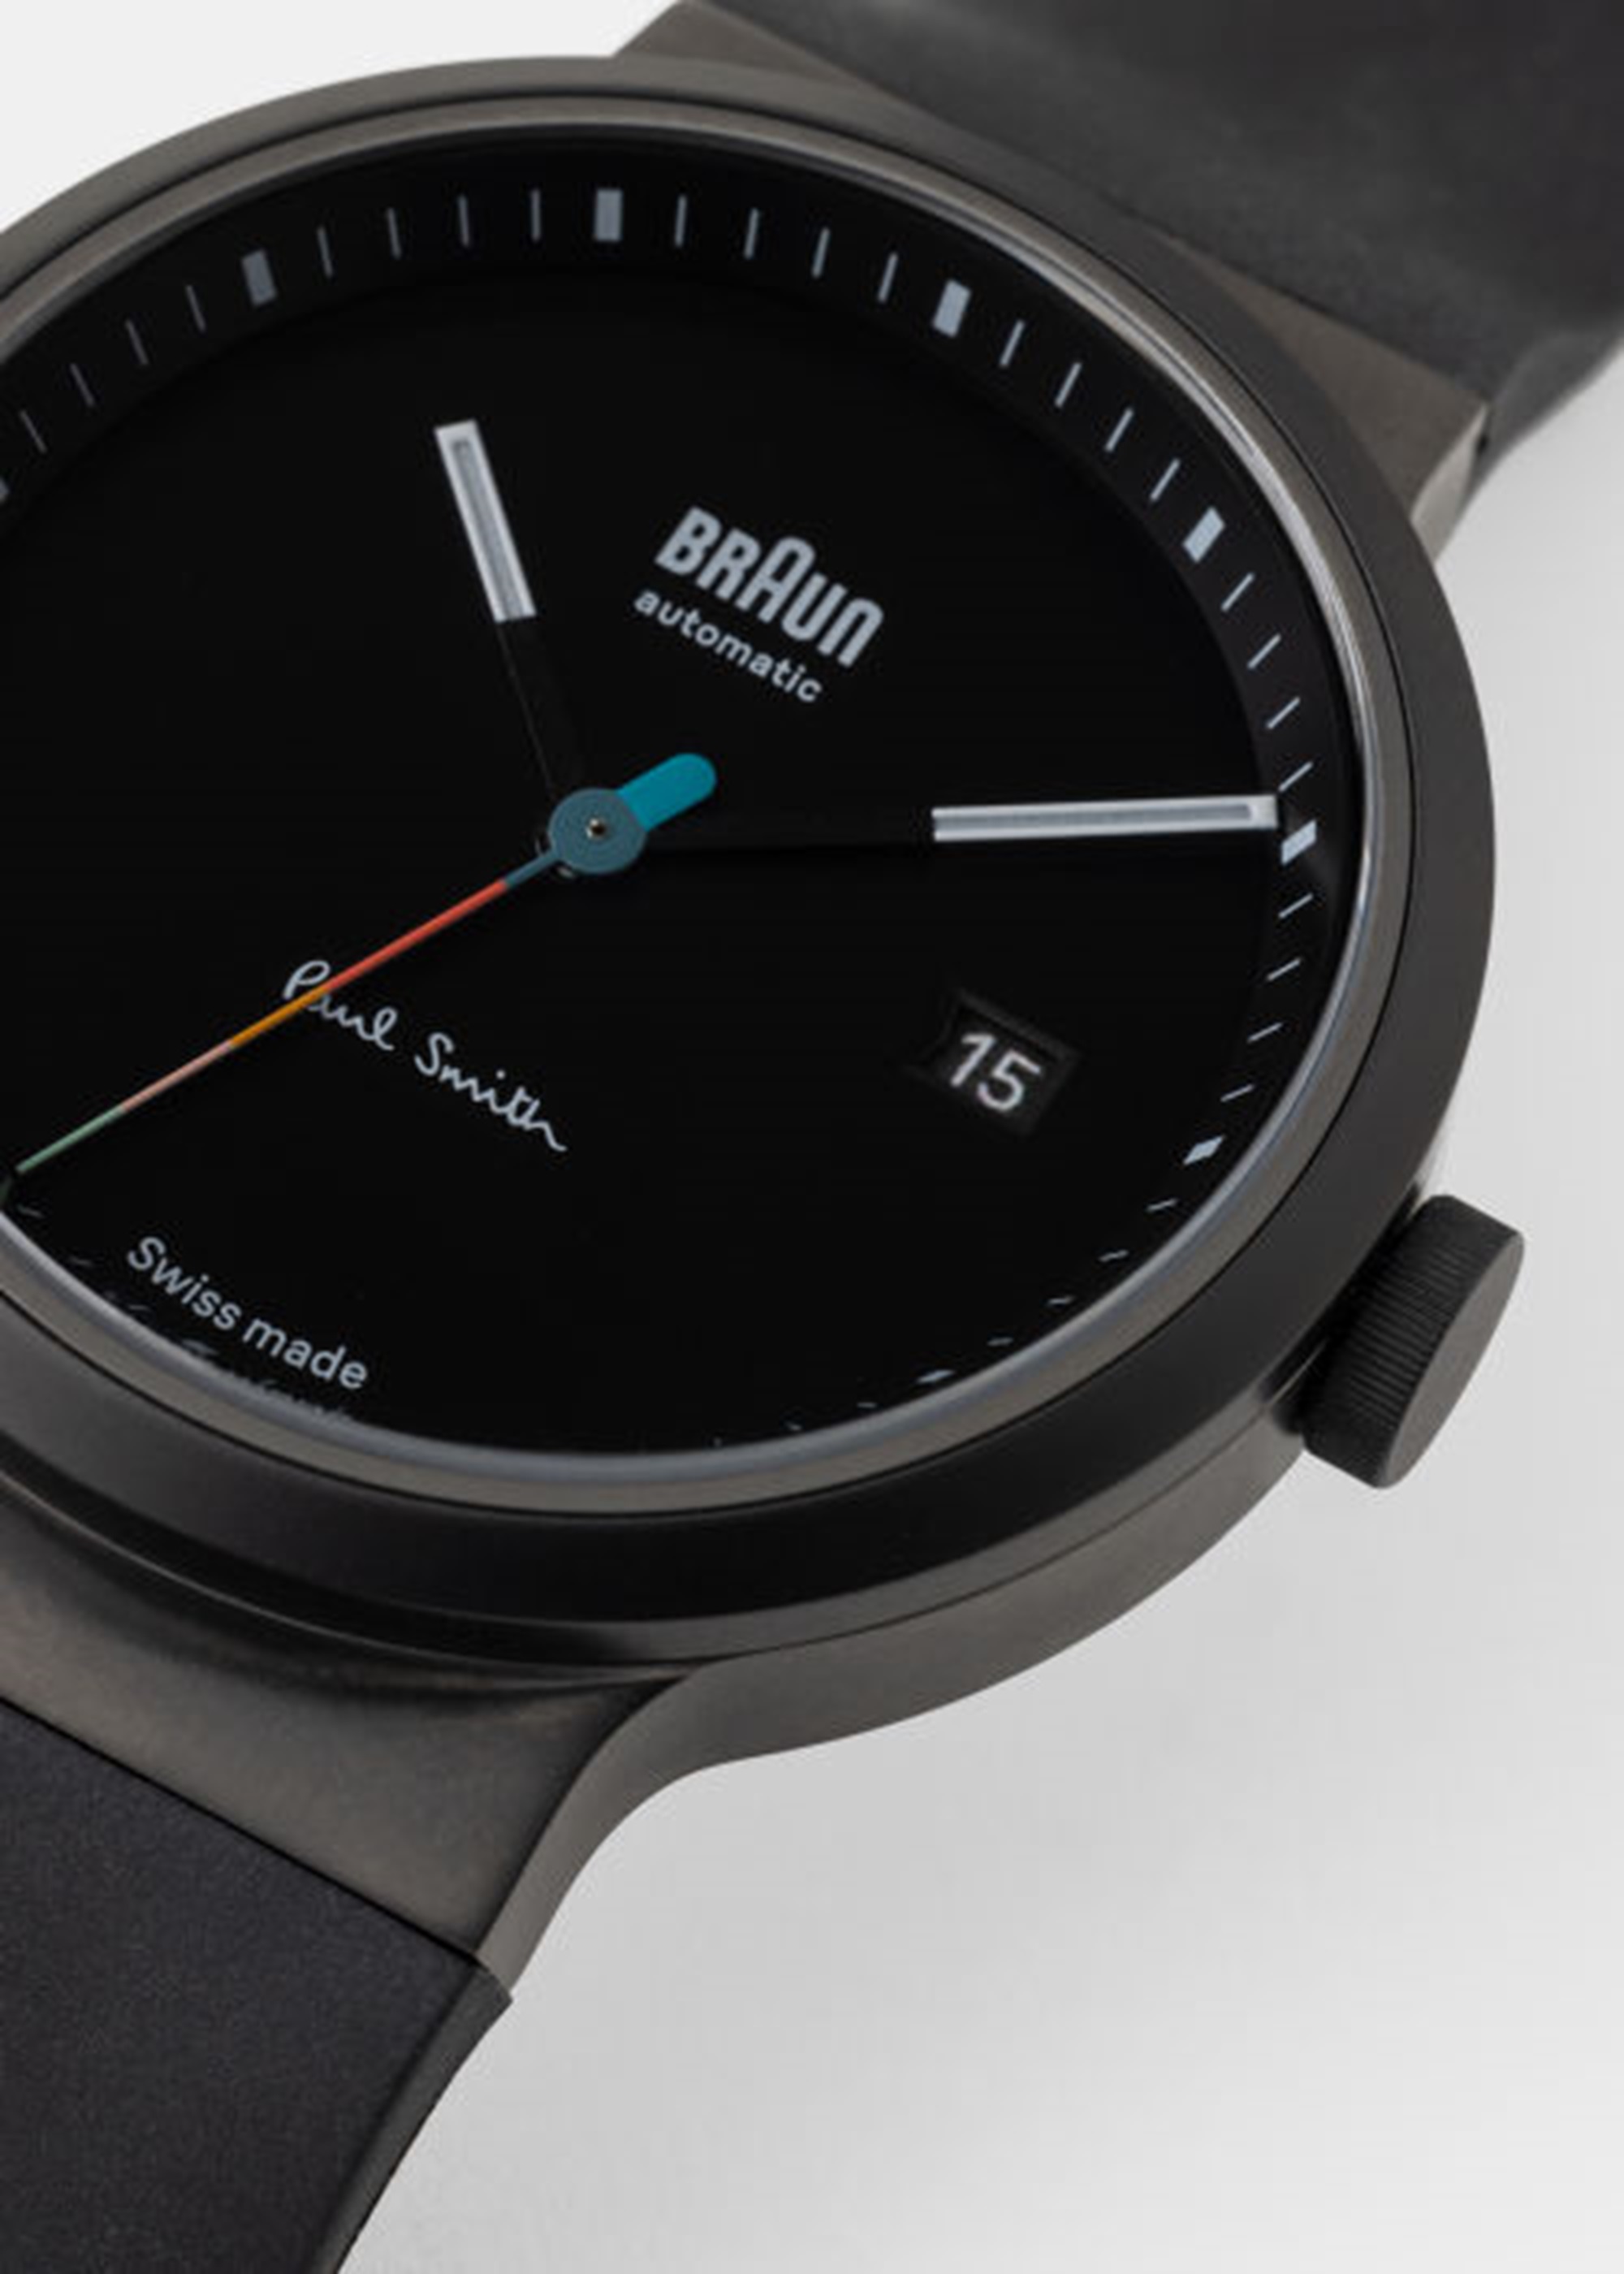 Braun and Paul Smith team up once again for 2 new watches